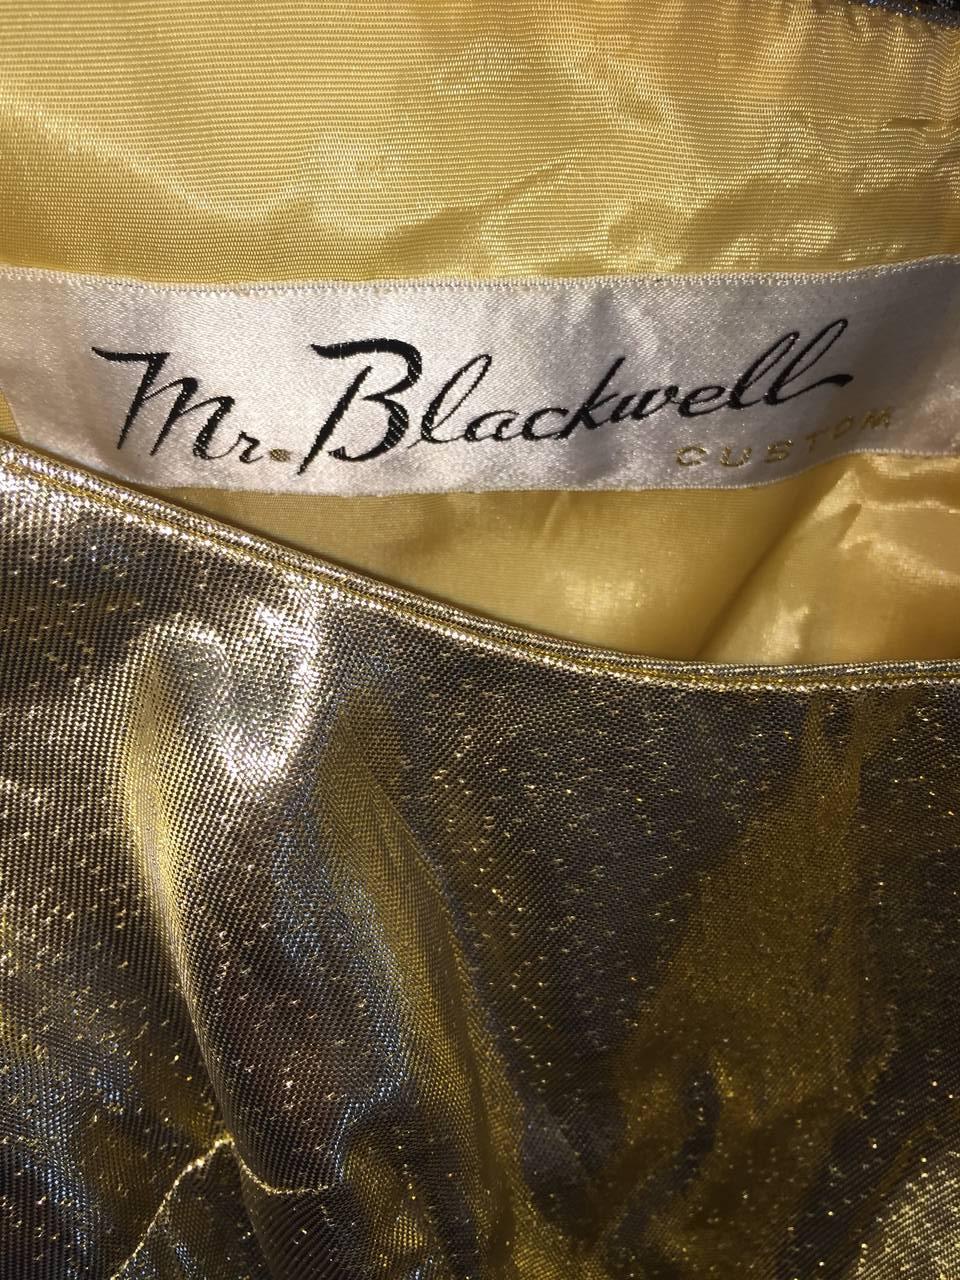 Women's Bombshell 1950s Mr Blackwell 50s Vintage Couture Gold Metallic Wiggle Dress Gown For Sale